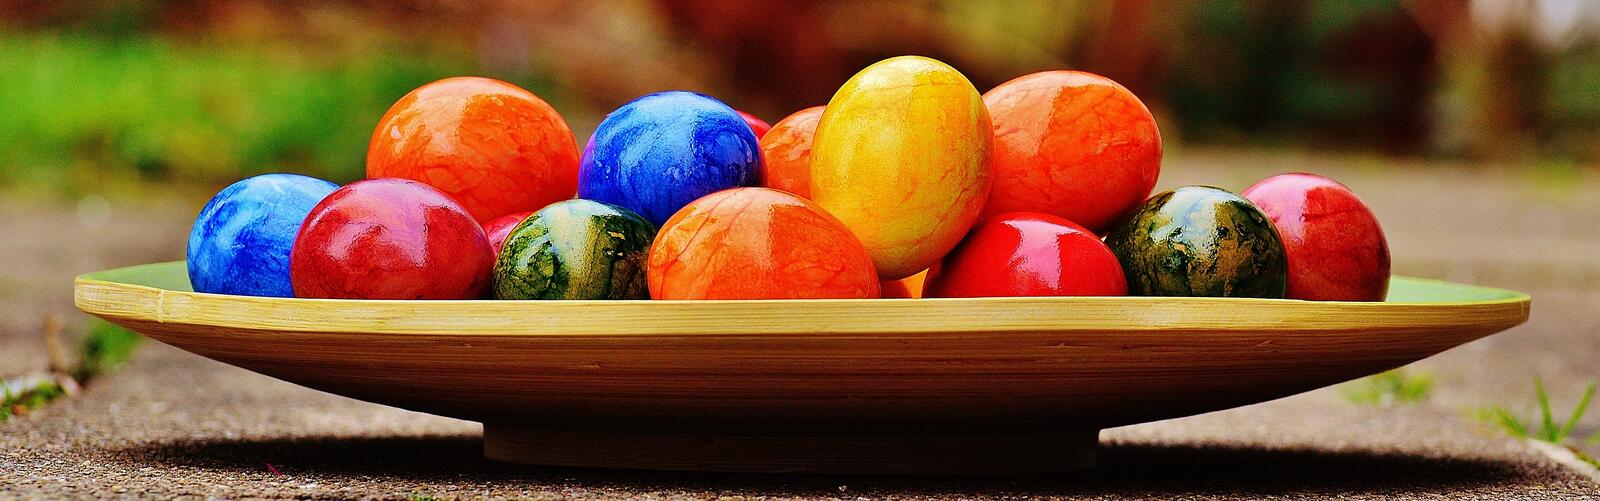 Free photo Large plate with colored eggs for Easter